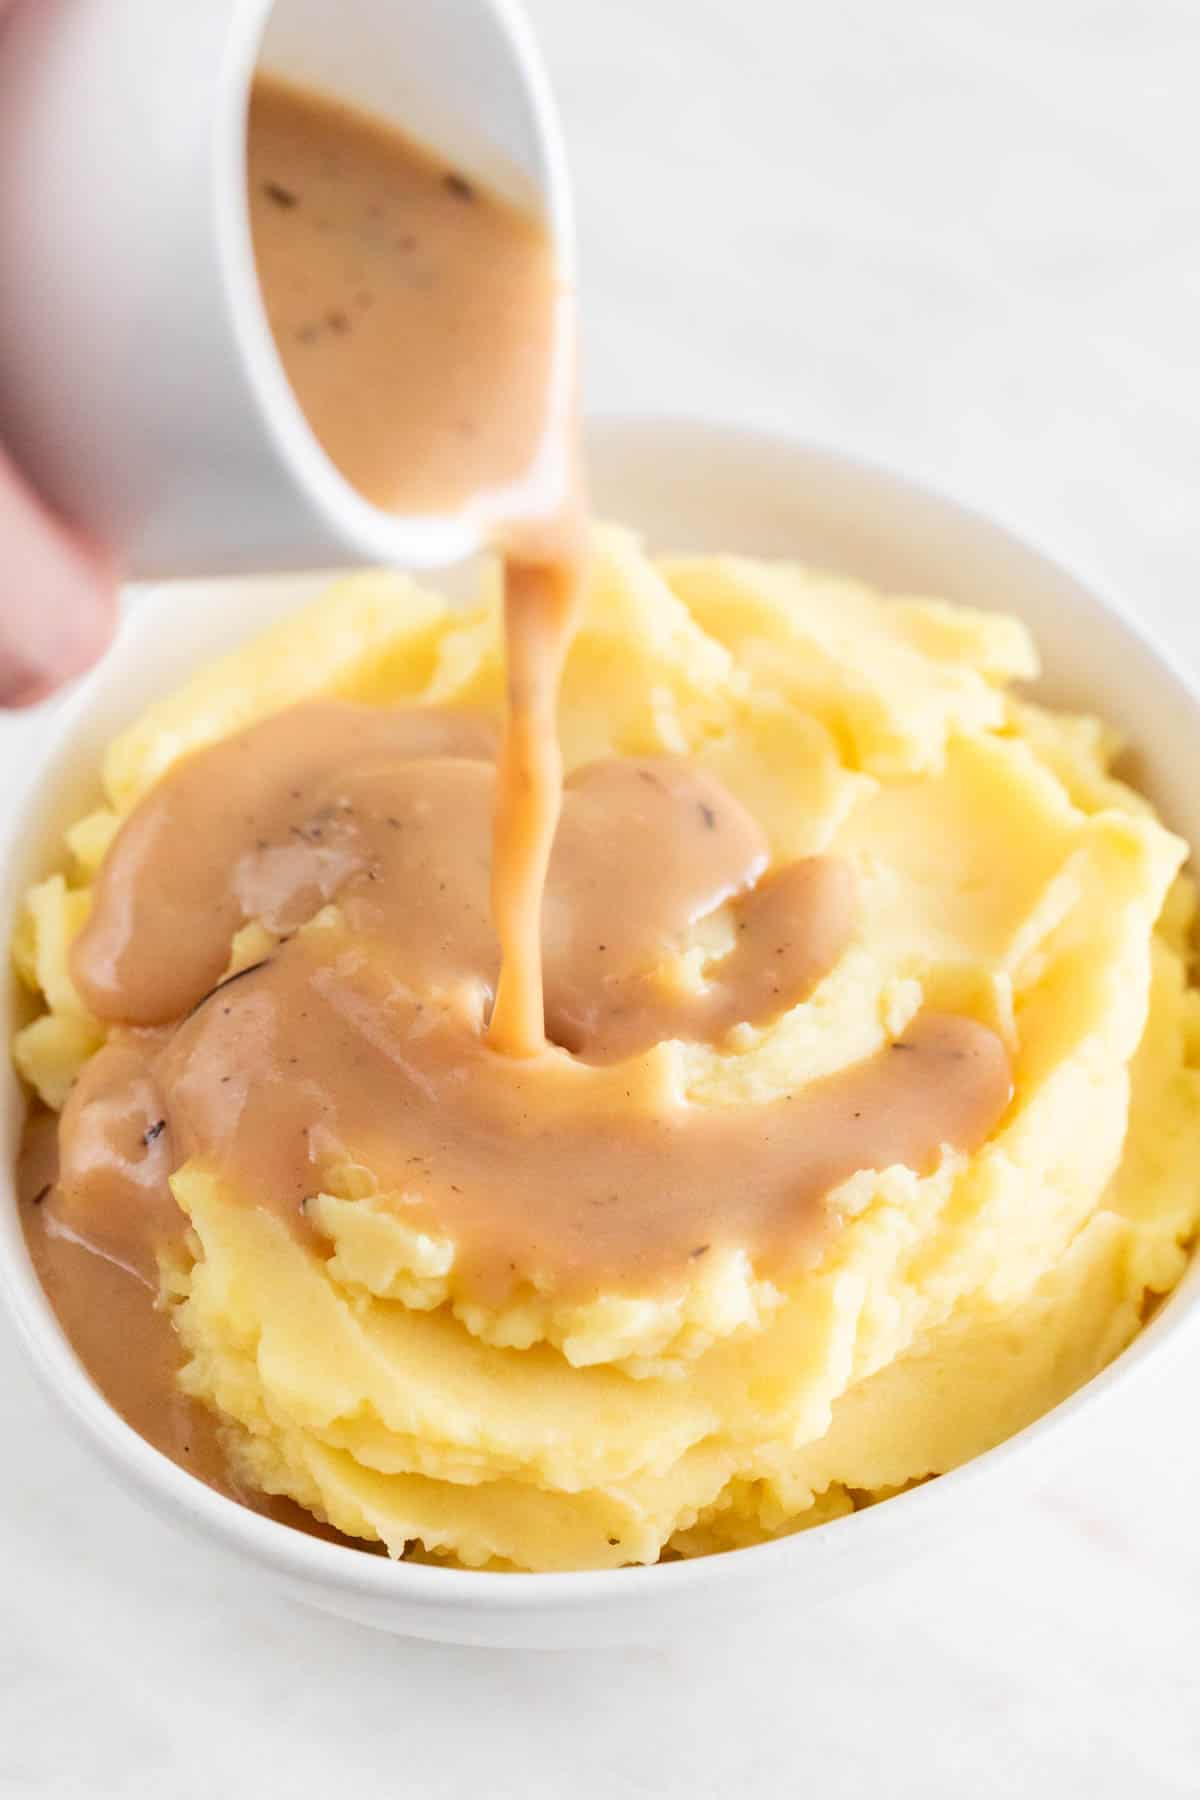 A hand pouring some vegan gravy over a bowl of mashed potatoes.